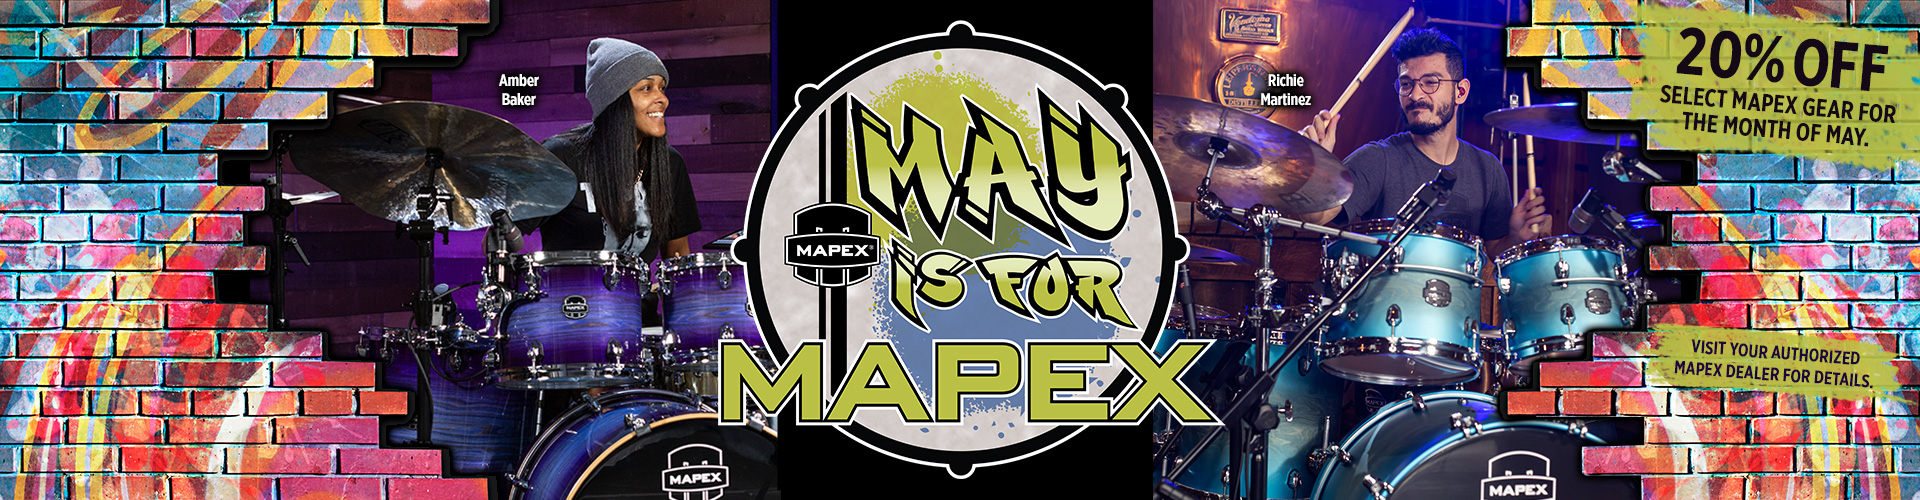 May is for Mapex